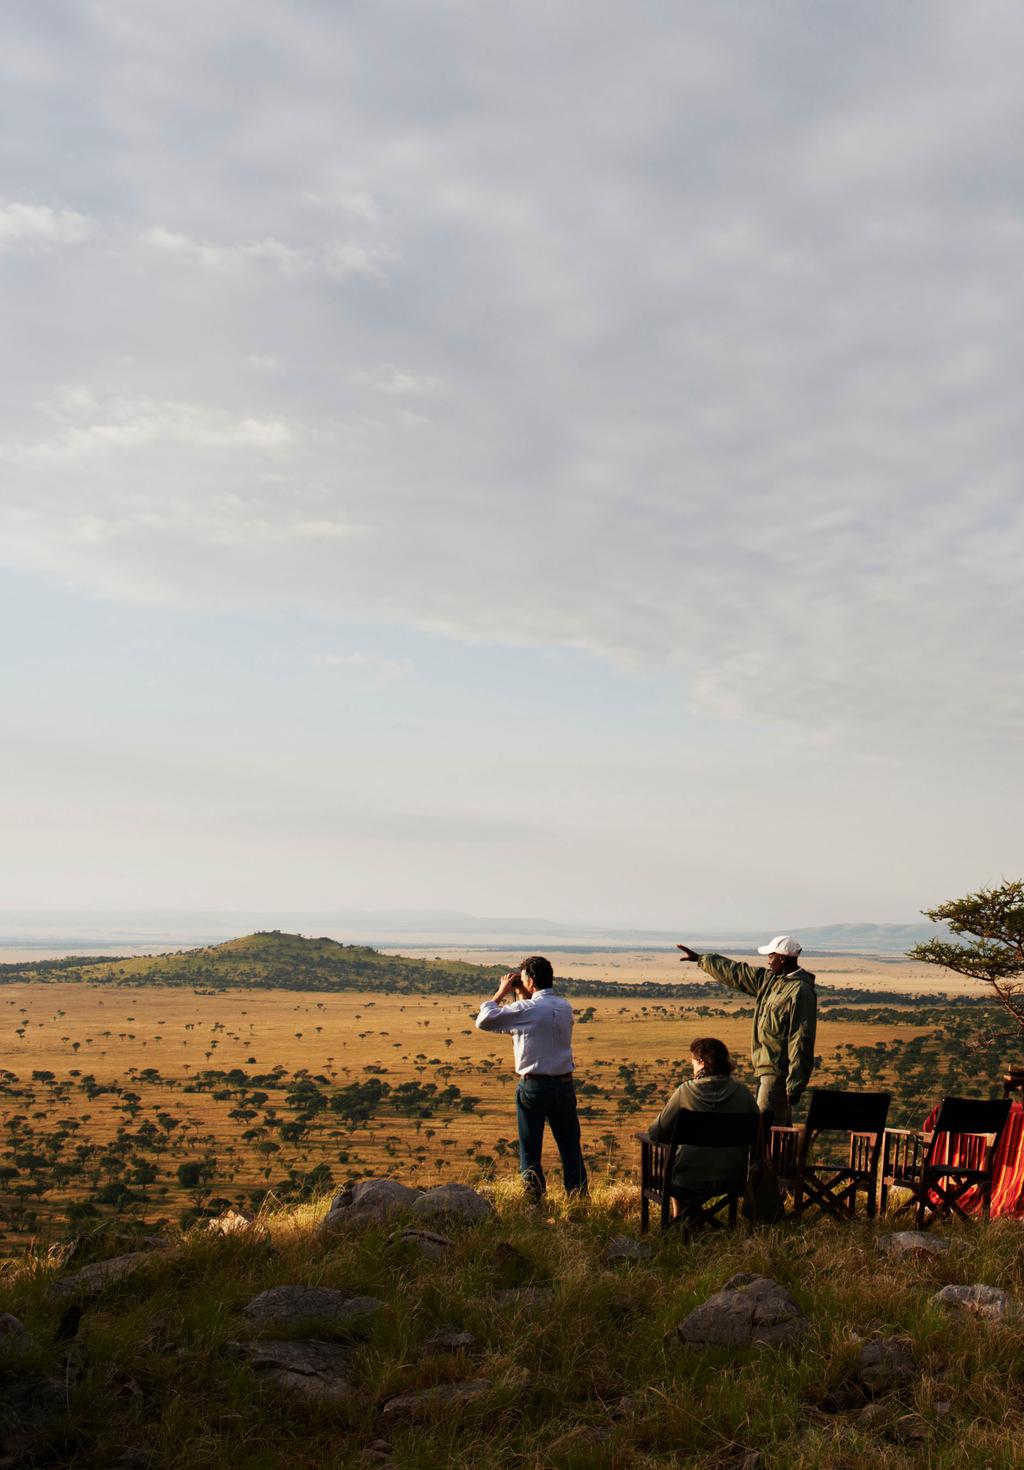 UNDOUBTEDLY THE BEST KNOWN WILDLIFE SANCTUARY IN THE WORLD Known by the Maasai people as "siringit -- the place where the land moves on forever".